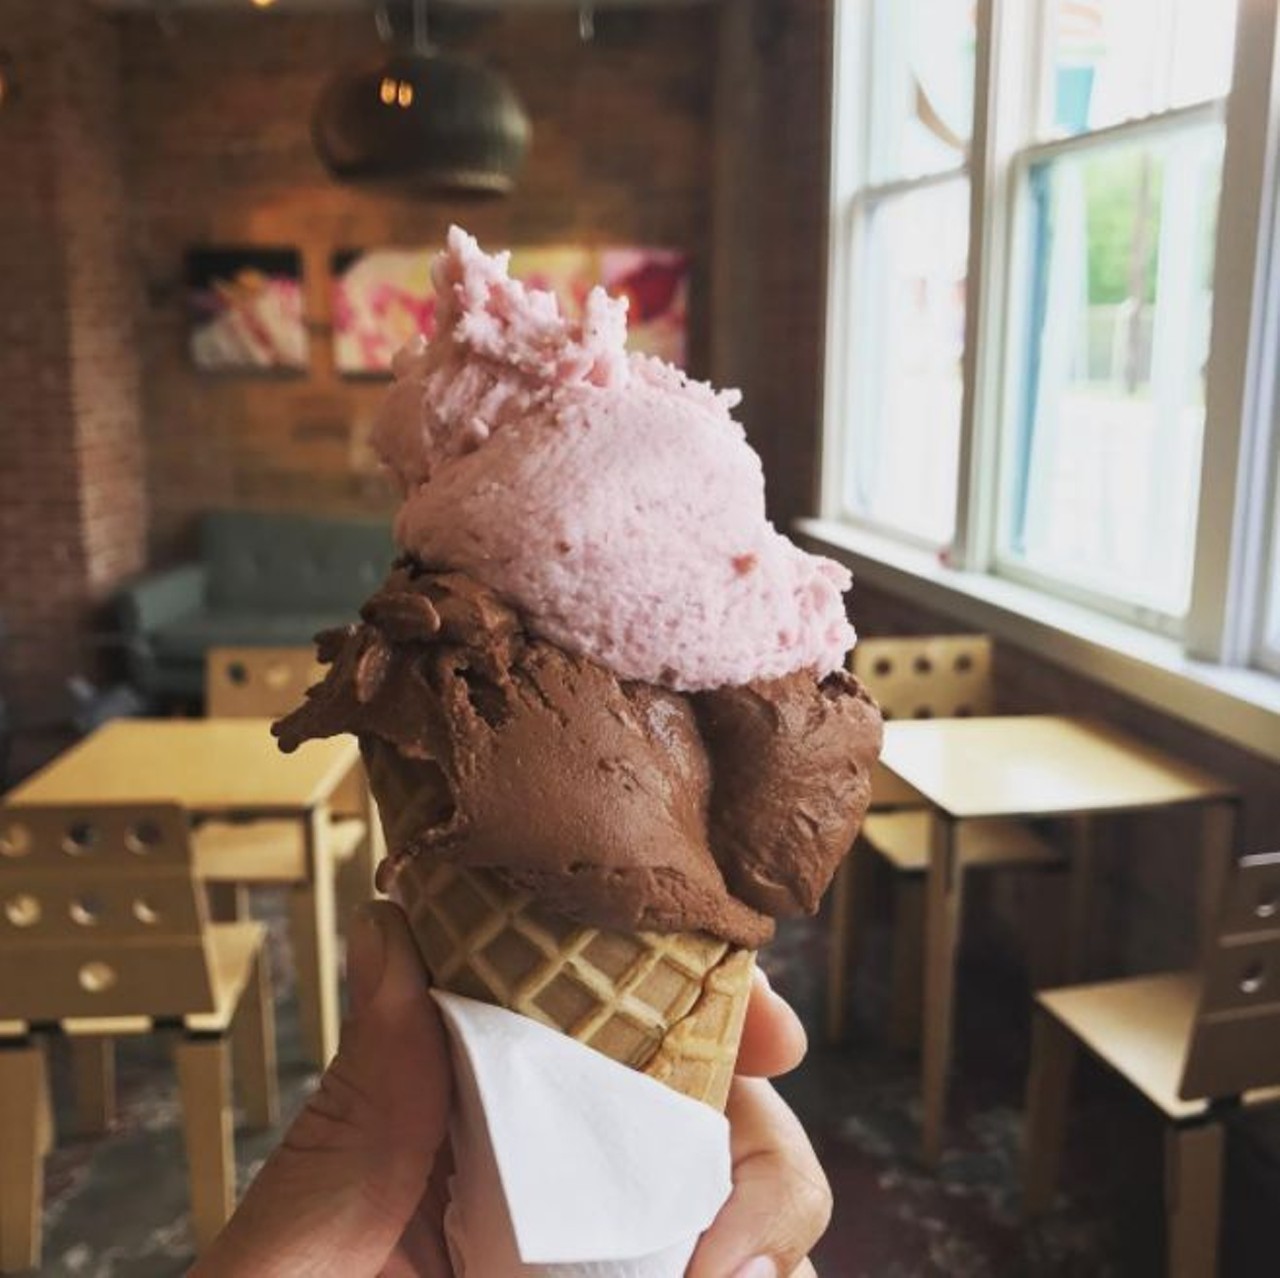 Split a cone at South Alamode
Gelato, anyone? With several flavors of gelato to choose from, stoping in at this Southtown spot is both a tasty and refreshing way to cool off. We recommend sharing a cone with a friend to cut down on costs, though we wouldn't blame you wanted to spring for your own.
Photo via Instagram,  thatguylos04